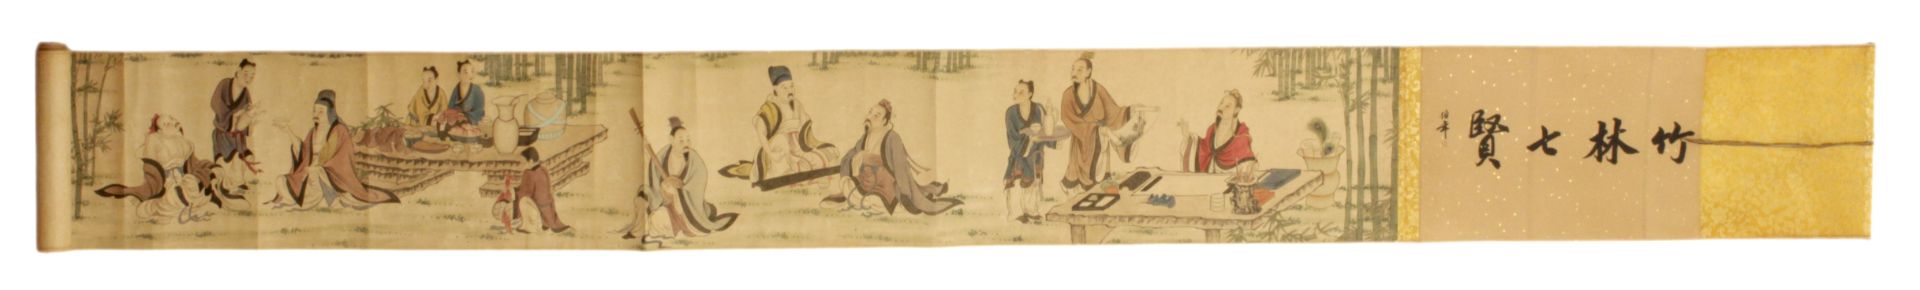 A 20th century Chinese scroll - Image 5 of 10